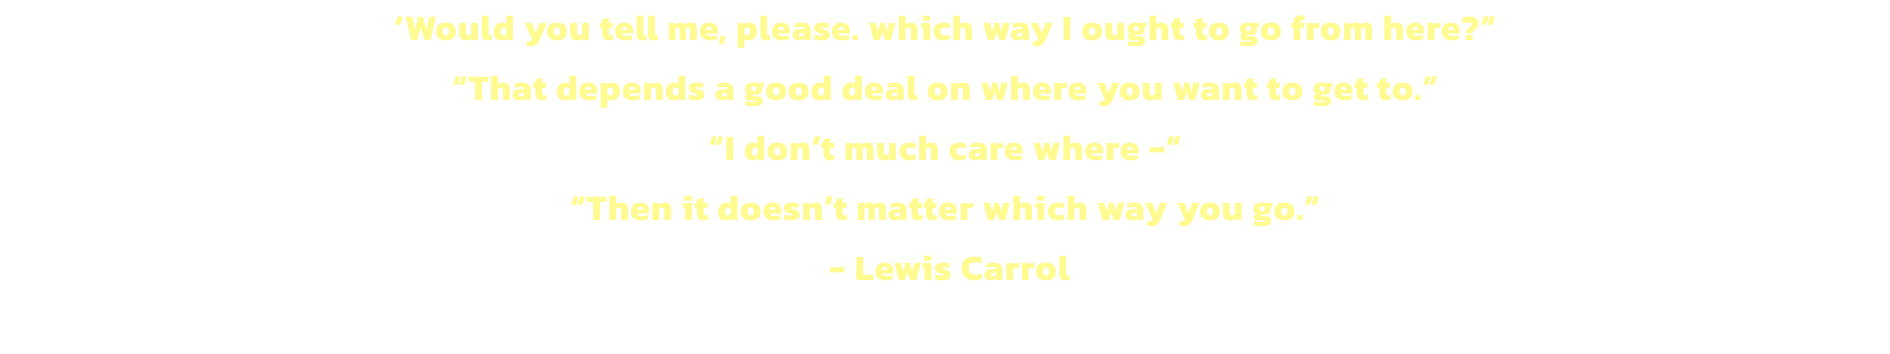 Would you tell me, please. which way I ought to go from here?
That depends a good deal on where you want to get to.
I dont much care where -
Then it doesnt matter which way you go. 
 - Lewis Carrol
